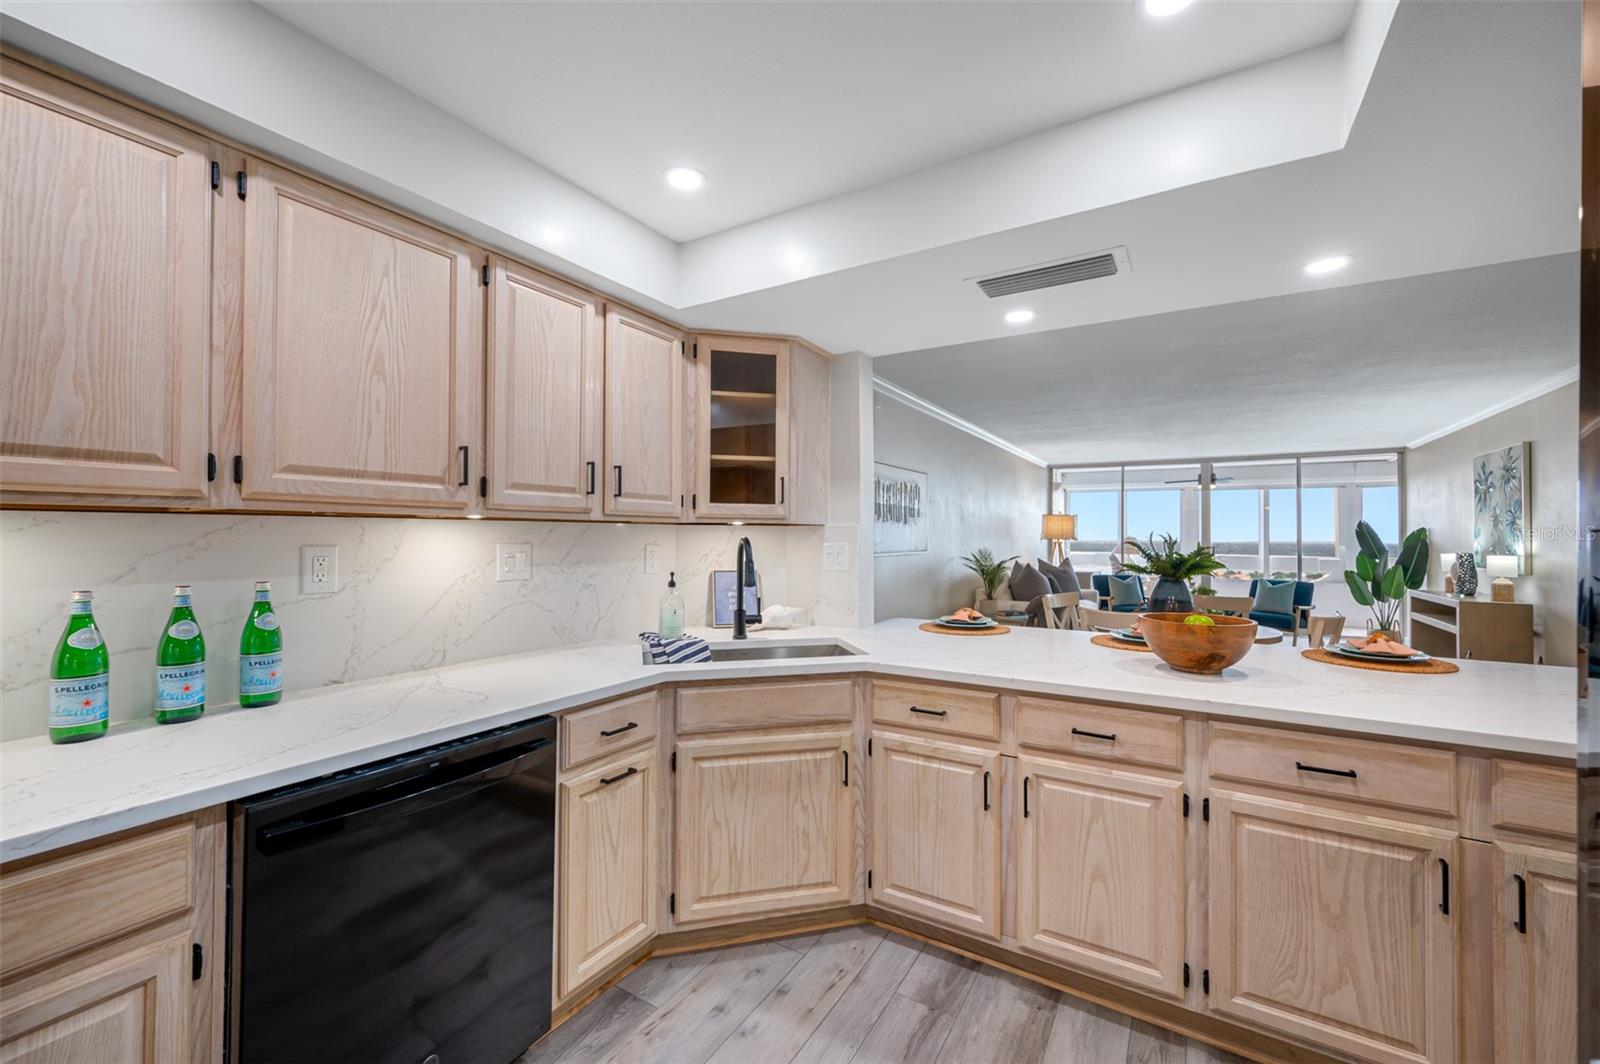 Remodeled kitchen with quartz countertops